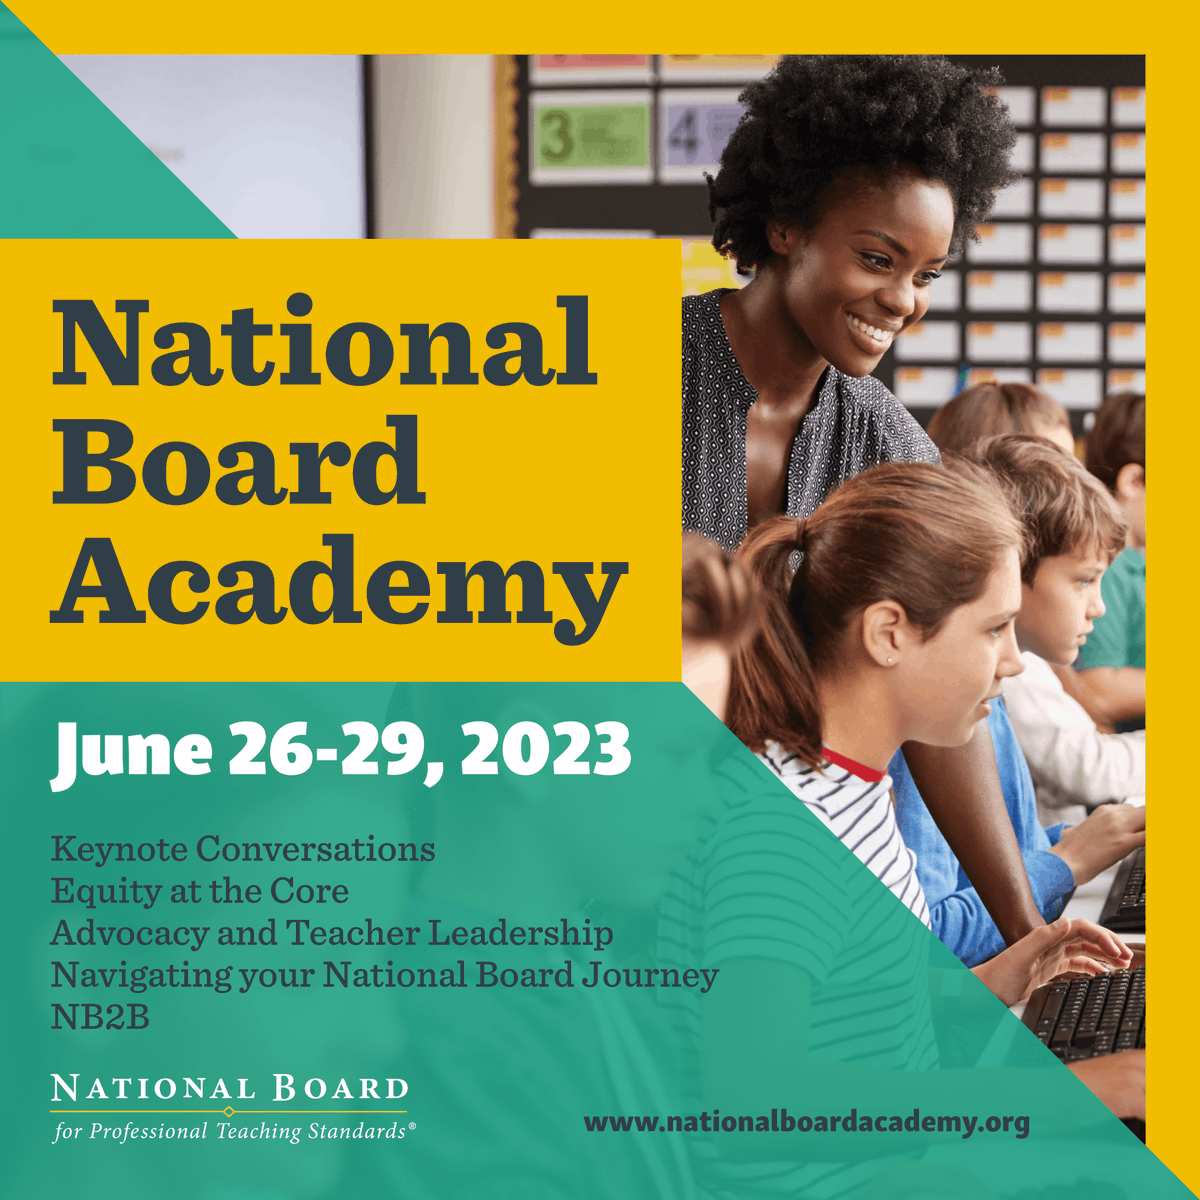 Join the free #NBAcademy June 26-29 to hear compelling speakers in conversation on current topics in education and addressing equity-focused change, teacher leadership, and going through the National Board process. #NBCTstrong hubs.ly/Q01TNMz90